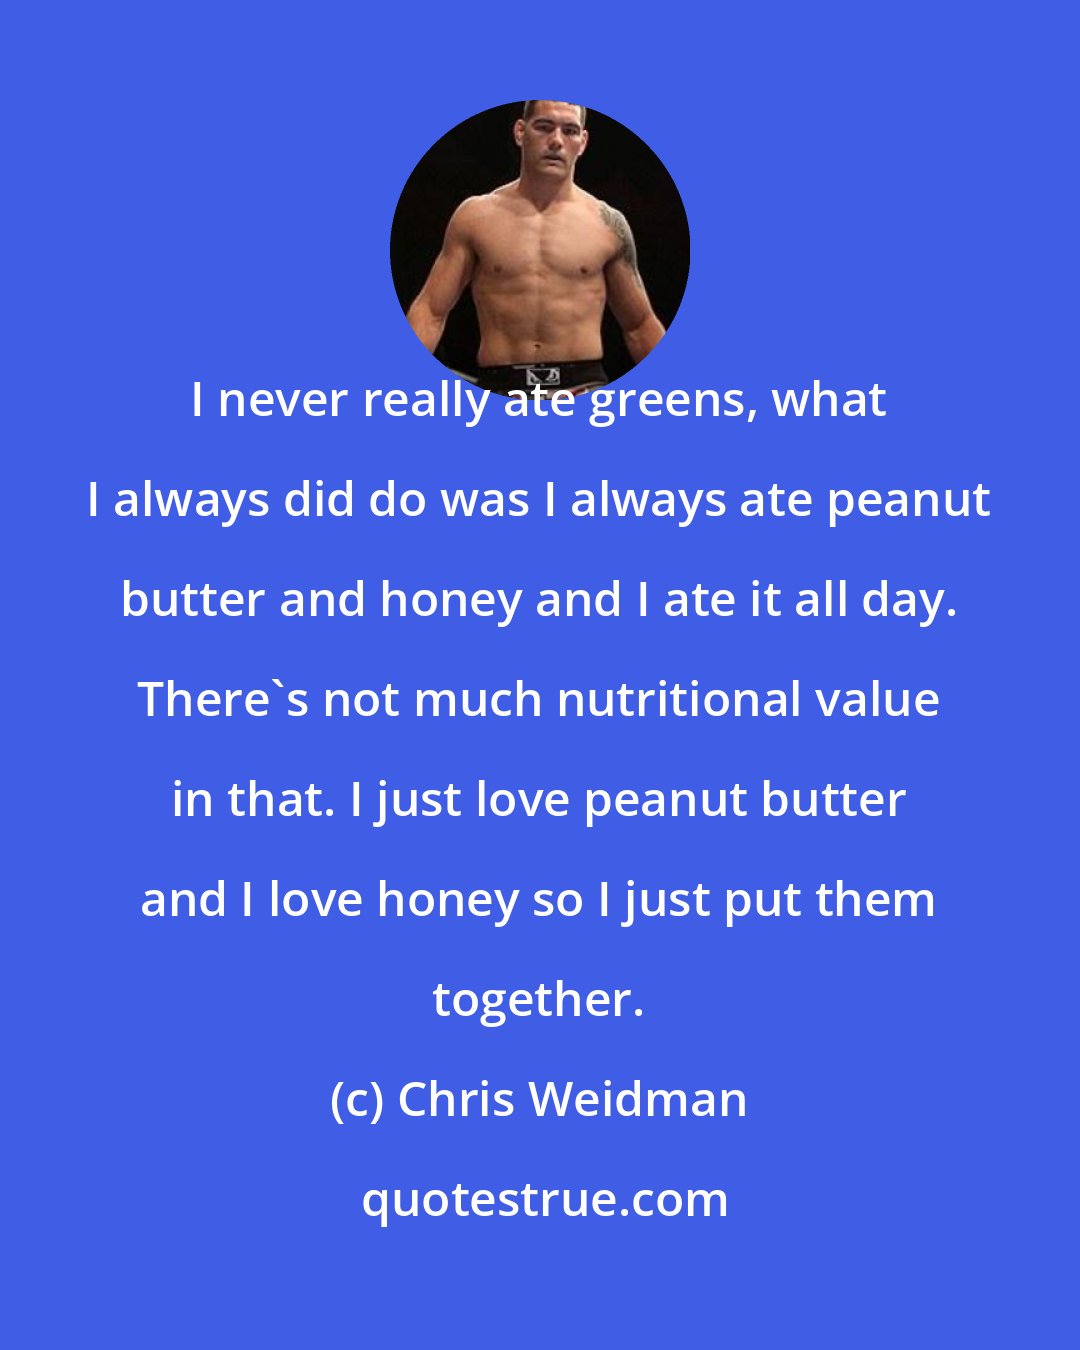 Chris Weidman: I never really ate greens, what I always did do was I always ate peanut butter and honey and I ate it all day. There's not much nutritional value in that. I just love peanut butter and I love honey so I just put them together.